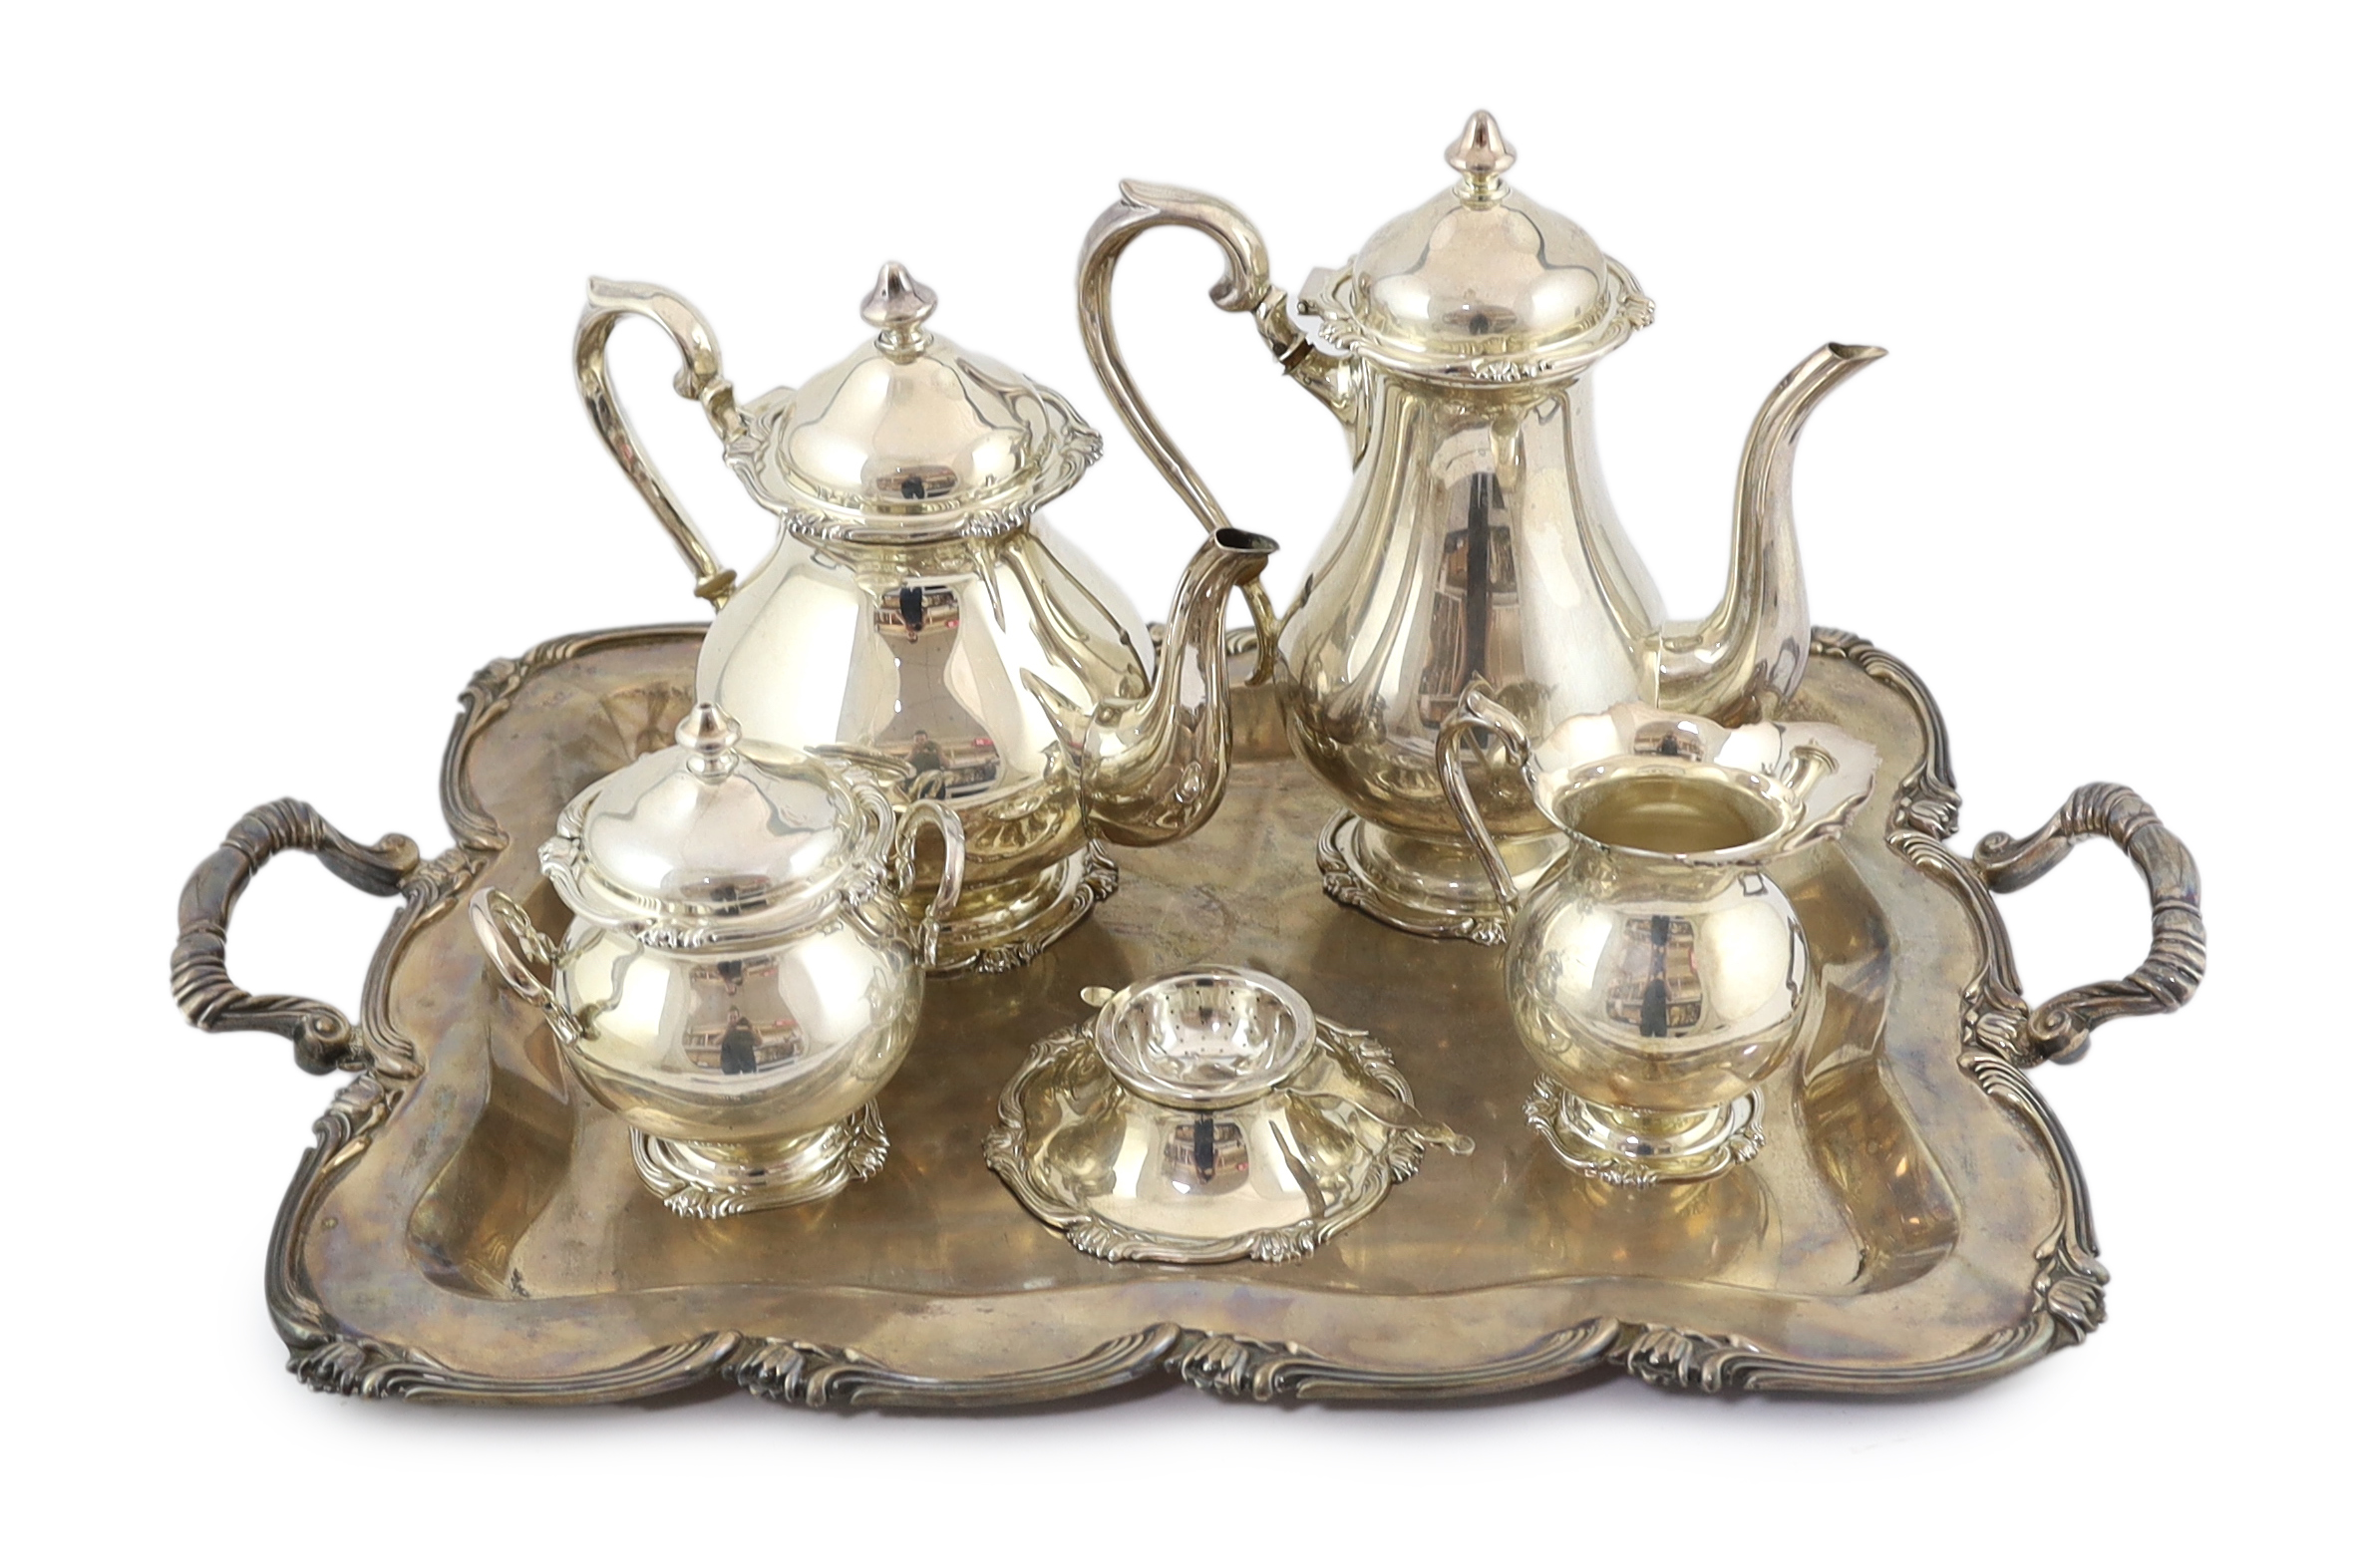 A 20th century Peruvian Camusso 925 sterling six piece tea and coffee service